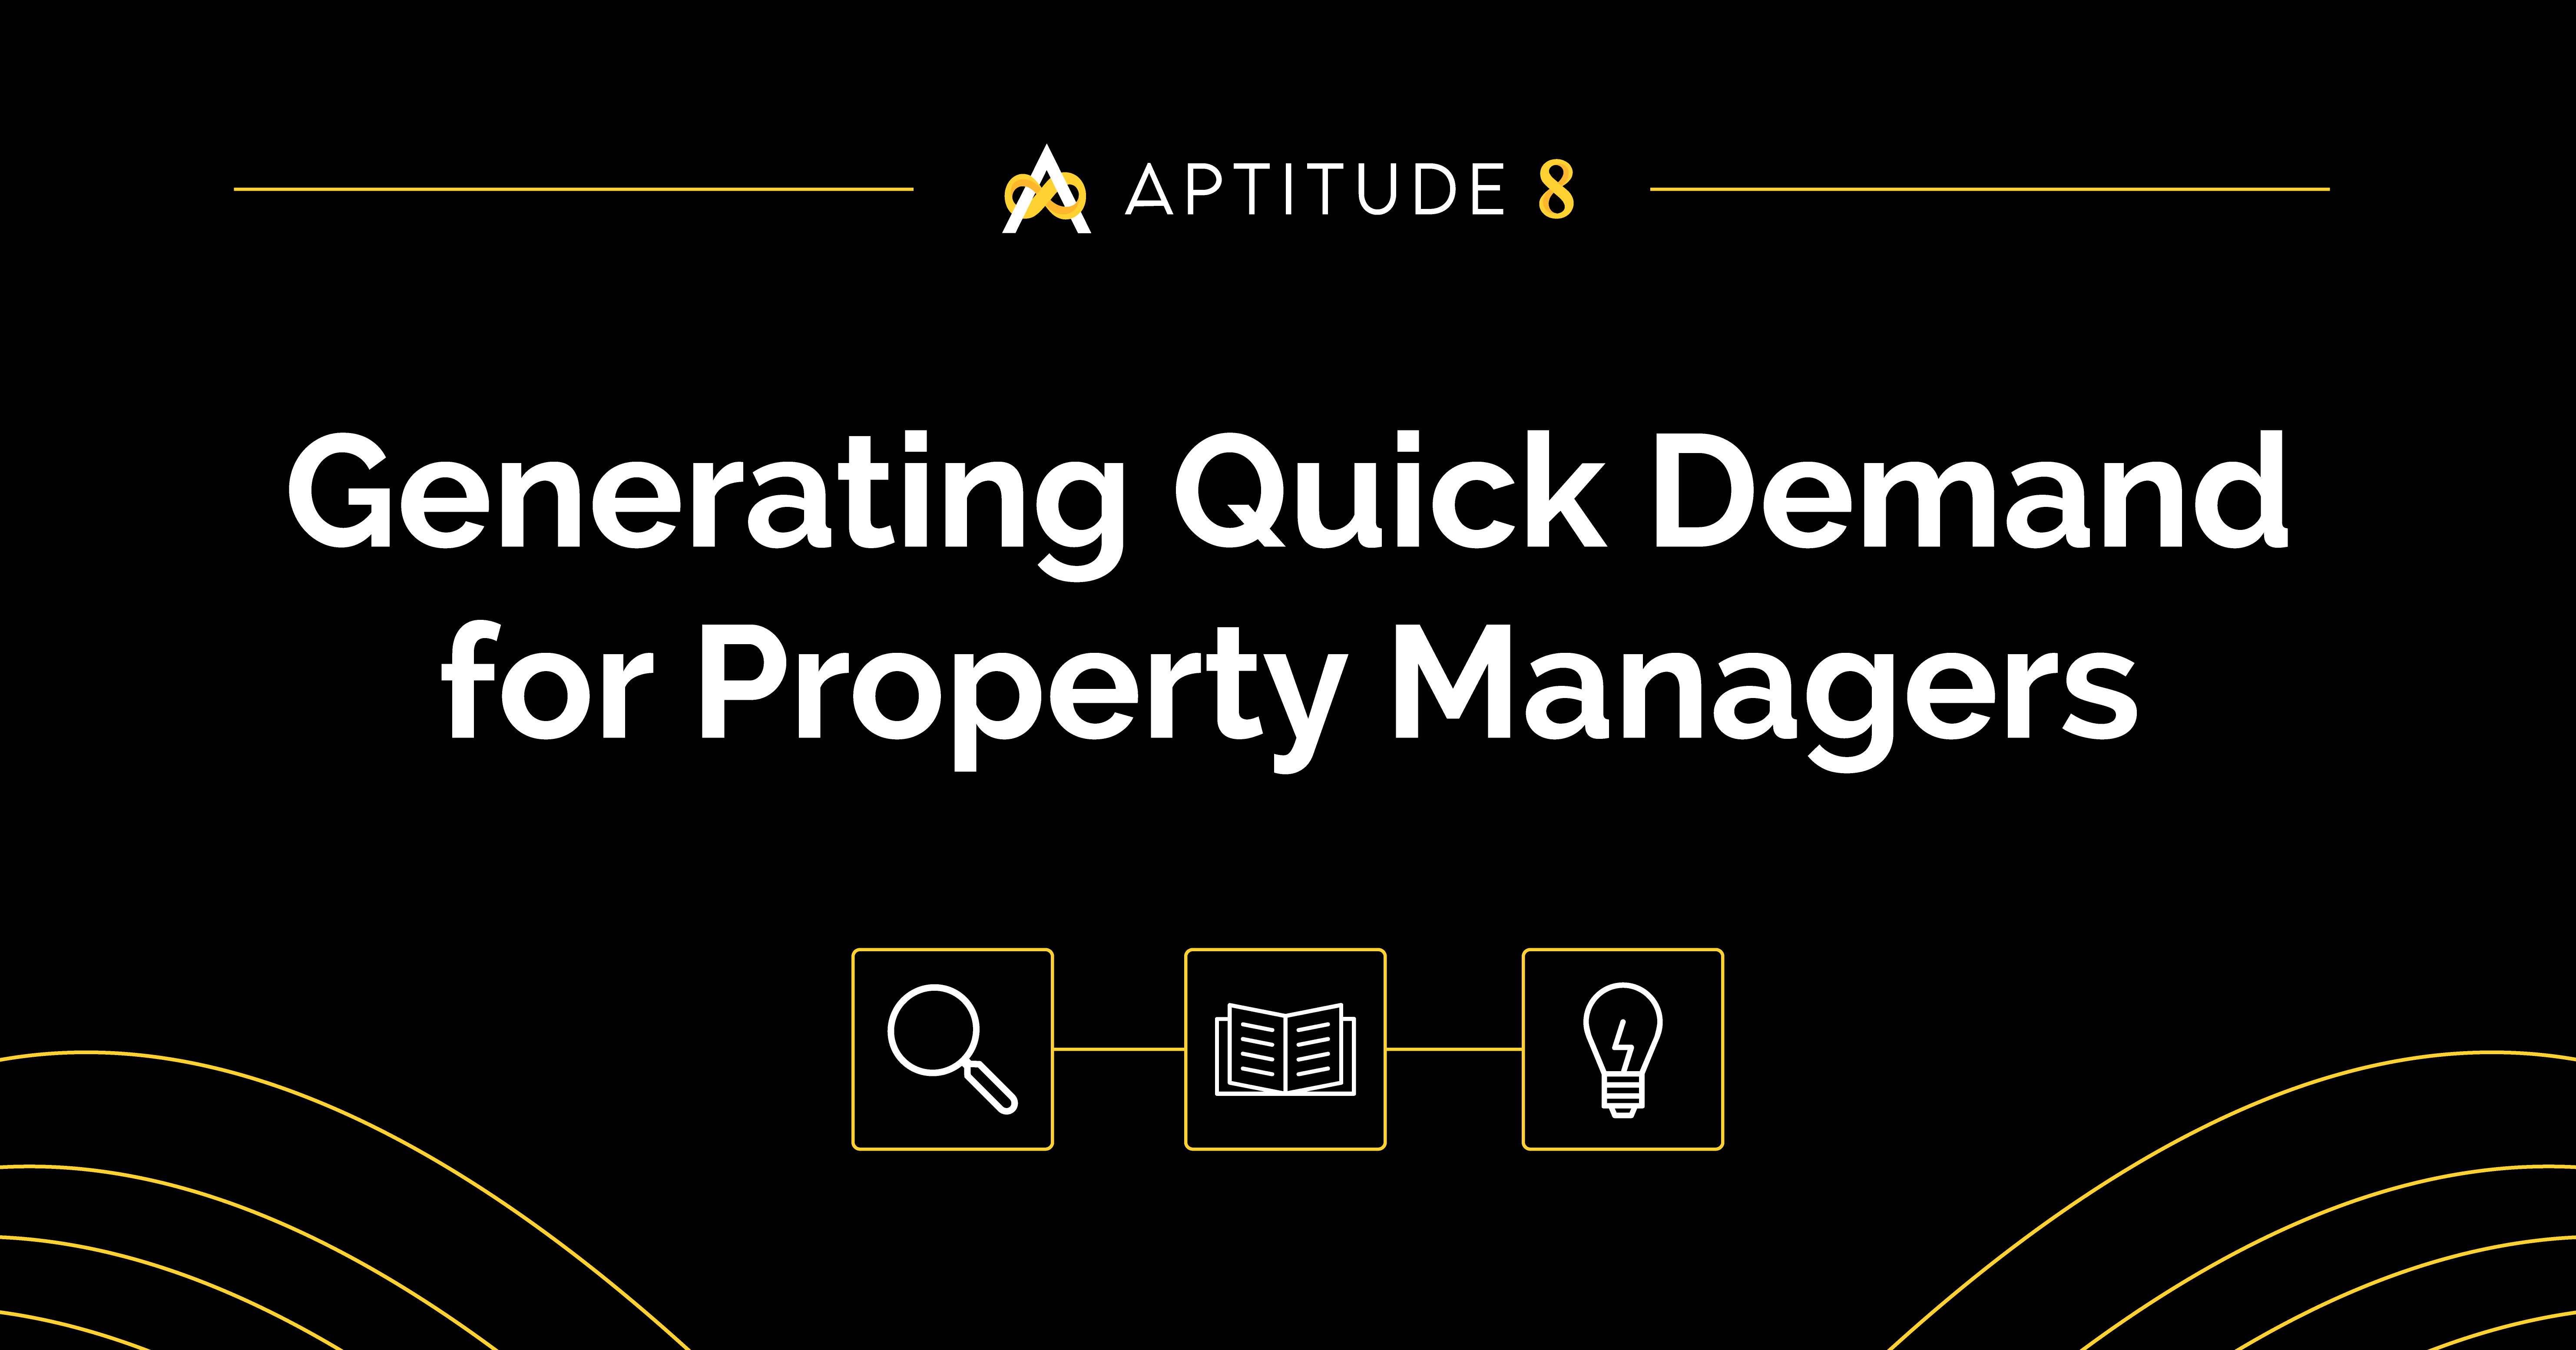 Generating Quick Demand for Property Managers